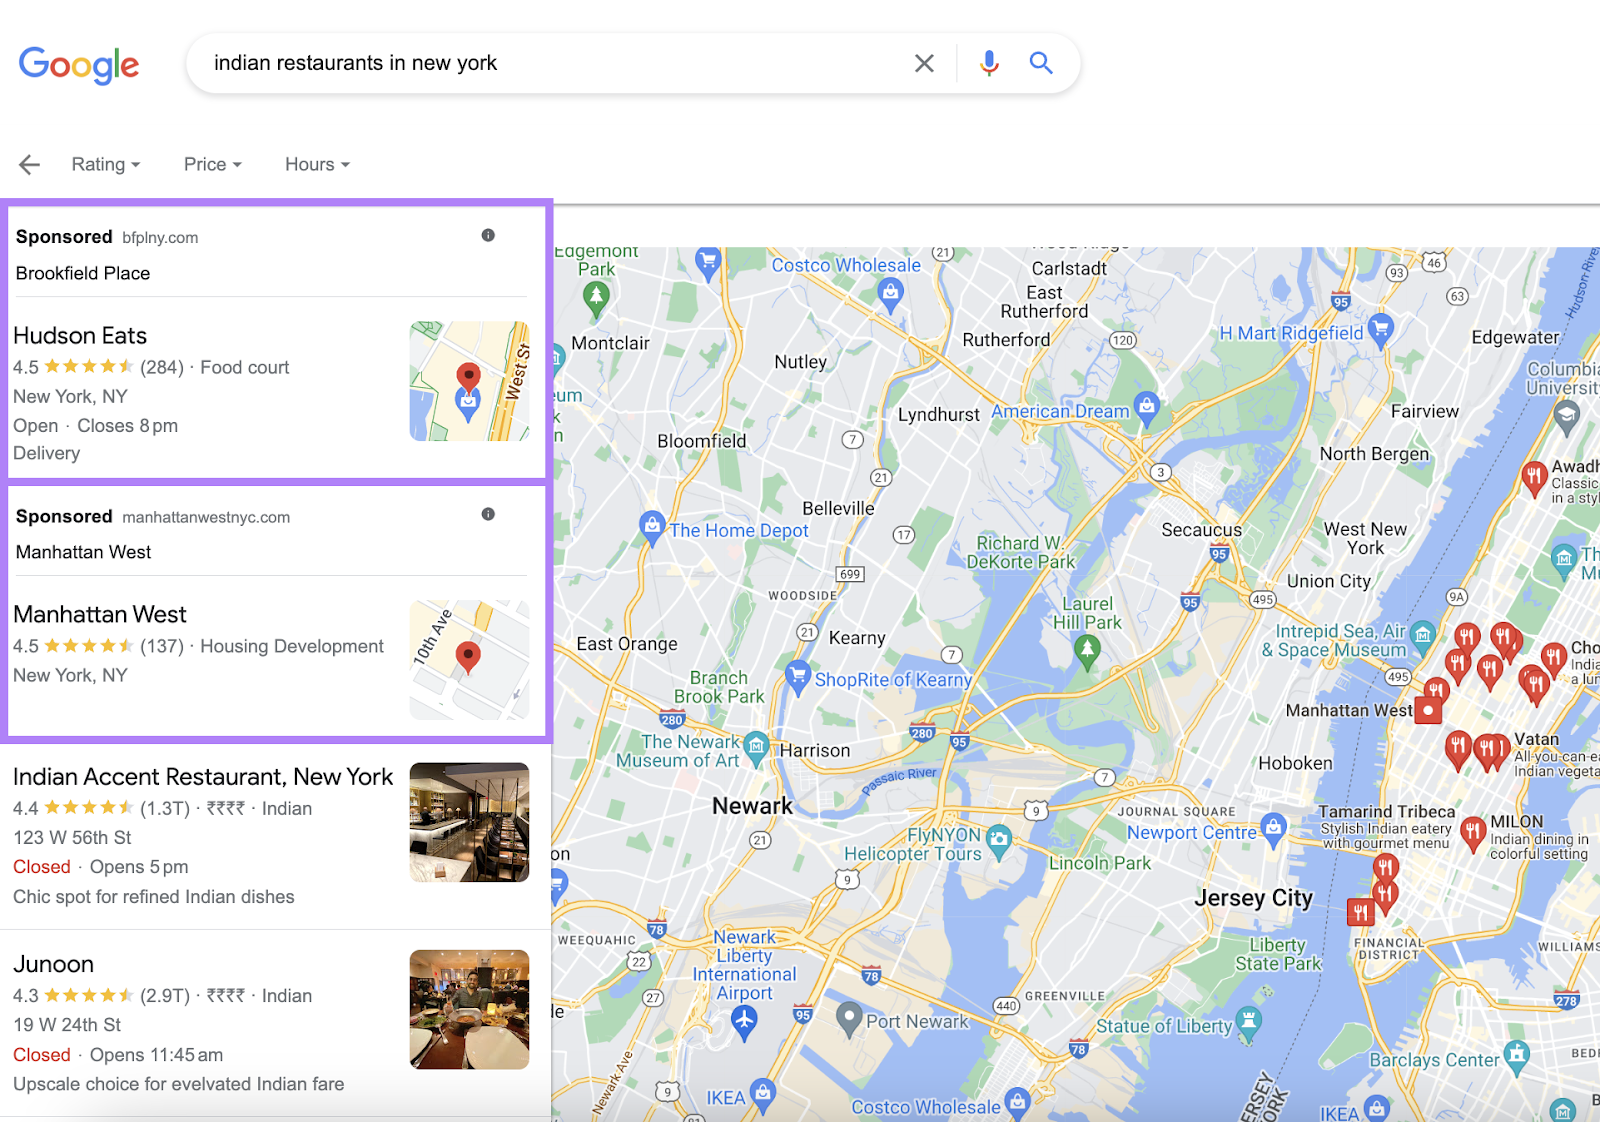 Google local pack results for “best restaurants in new york" query